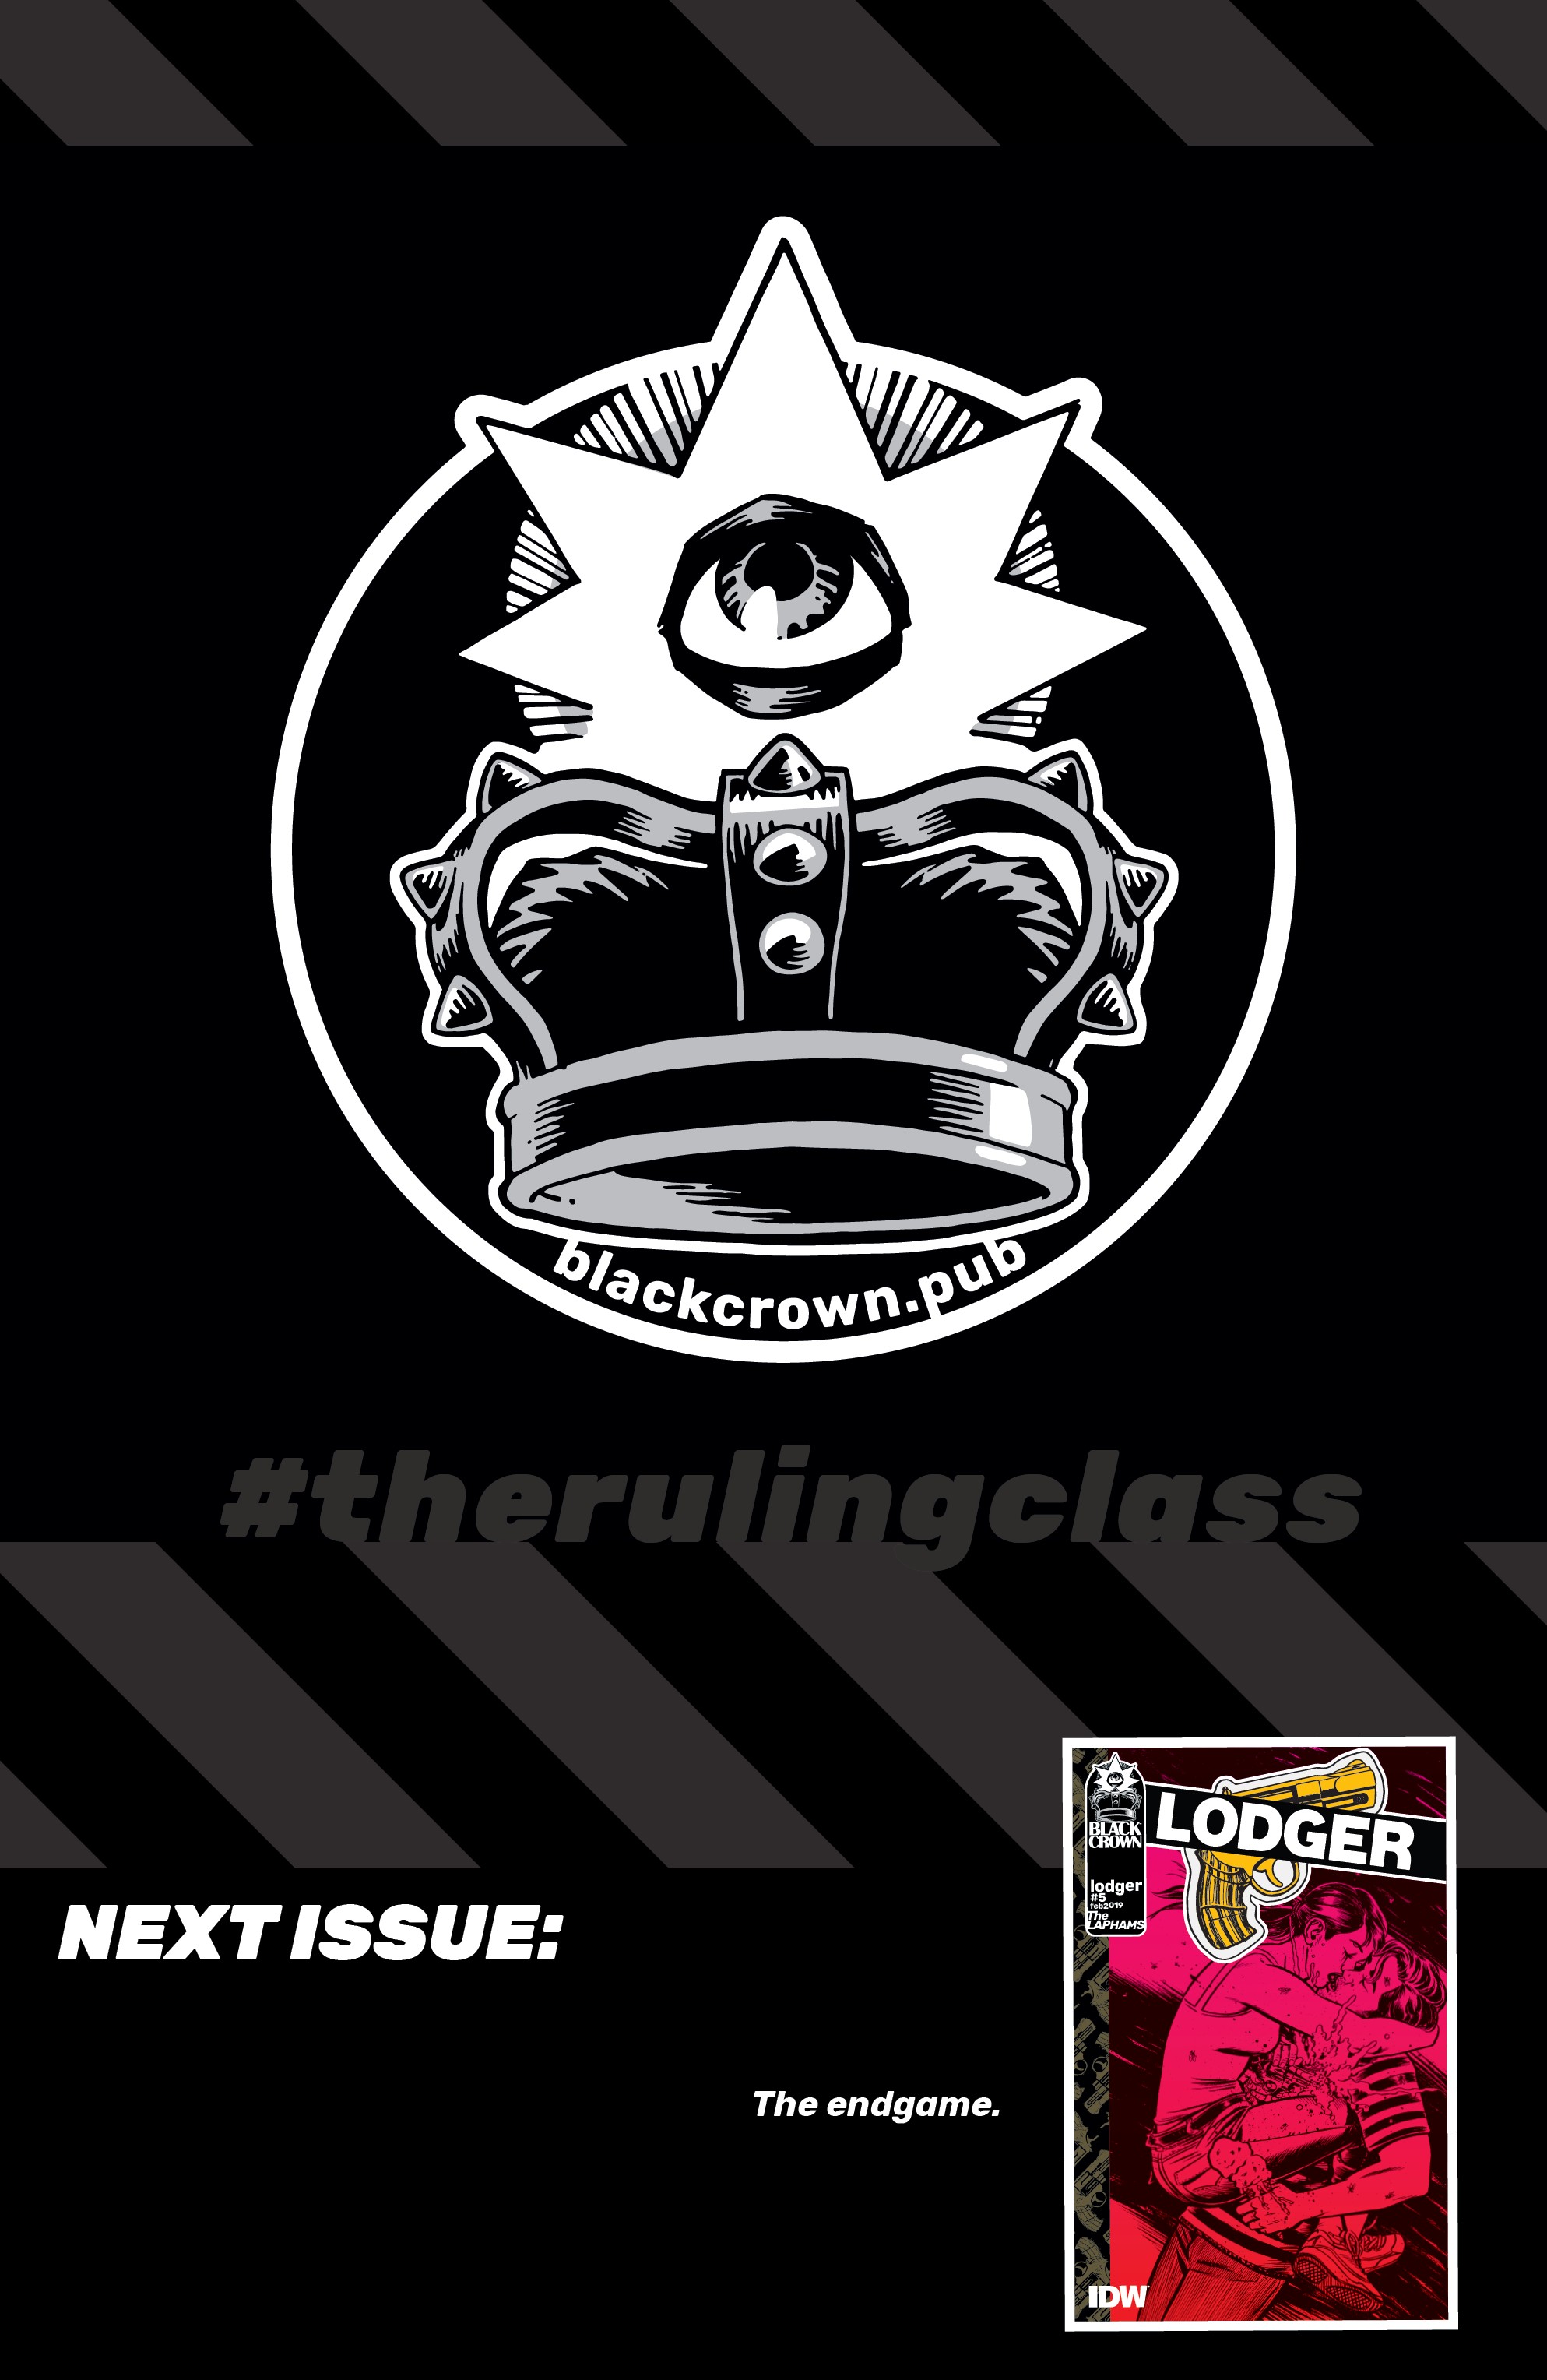 Read online Lodger comic -  Issue #4 - 28